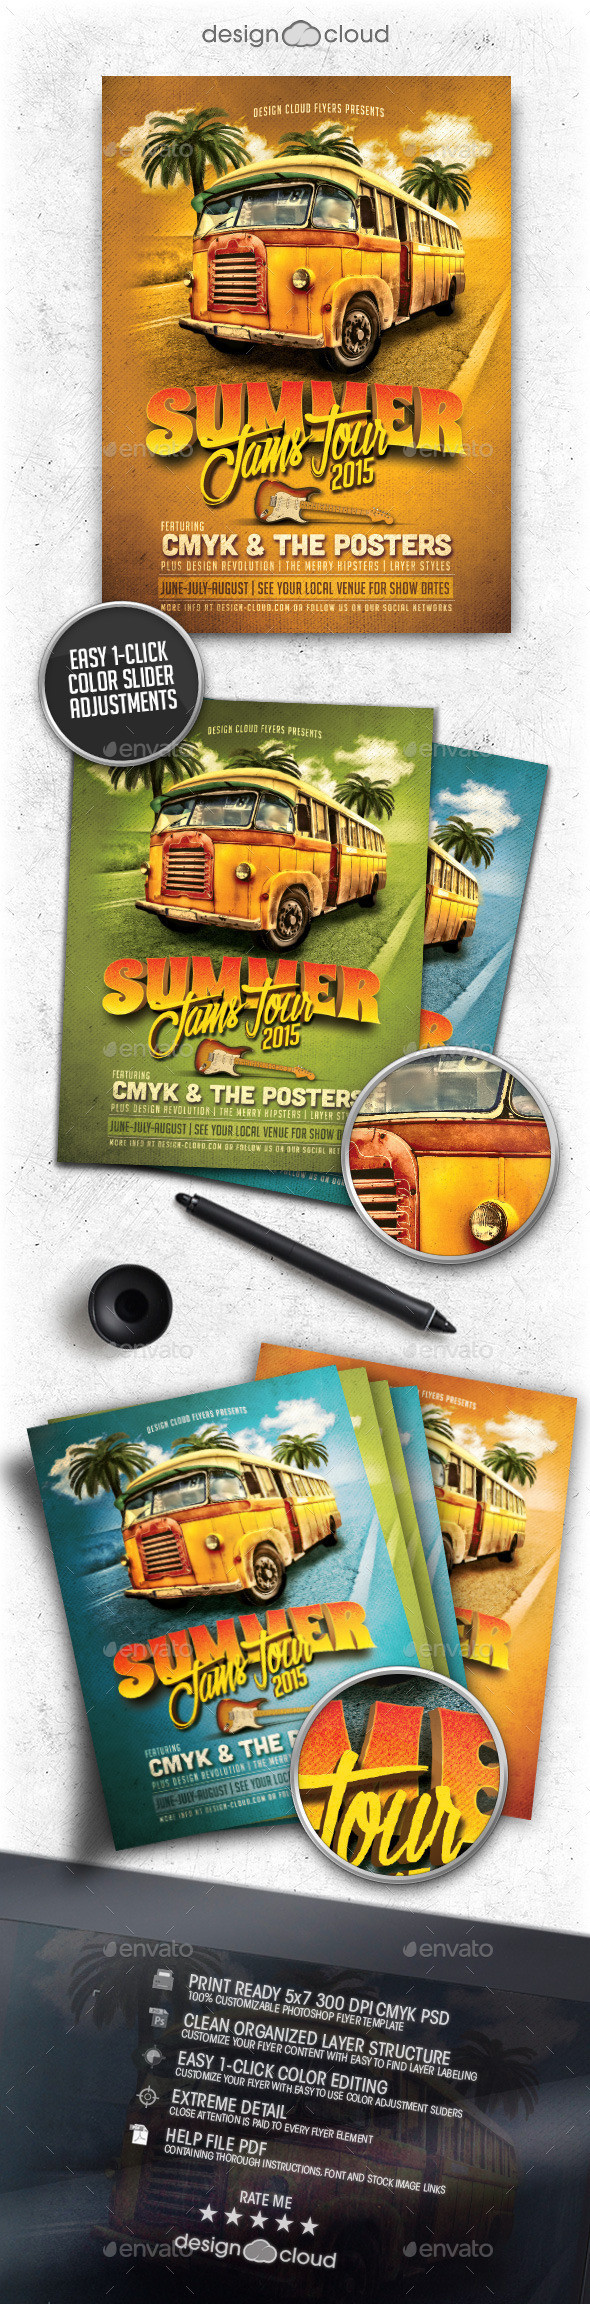 Preview summer jams tour poster flyer template